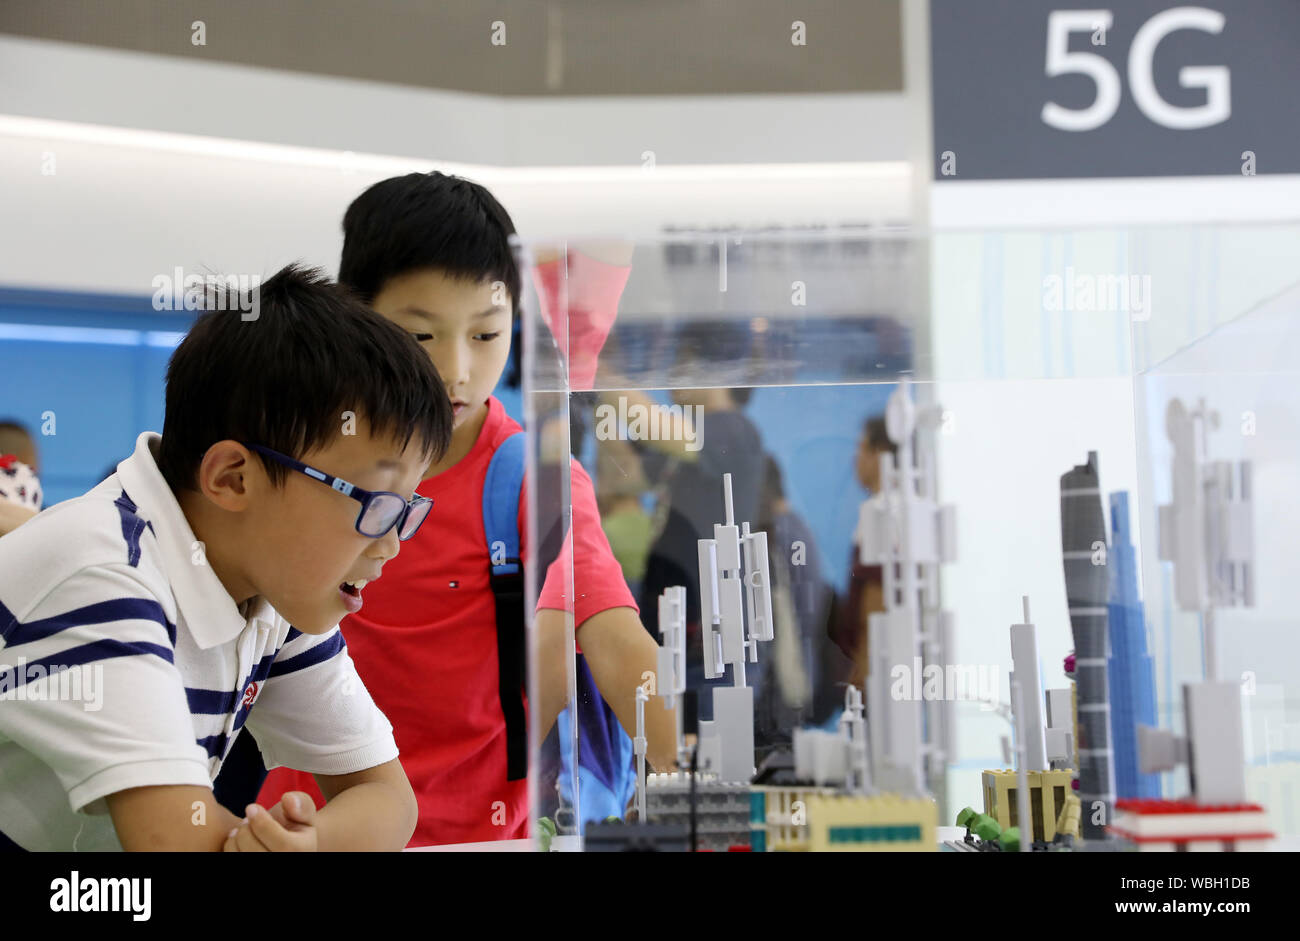 (190827) -- SHANGHAI, Aug. 27, 2019 (Xinhua) -- Kids view a model of 5G base station at the Huawei 5G Experience Booth during the preview of the 2019 World Artificial Intelligence Conference in east China's Shanghai, Aug. 26, 2019. China's economic hub Shanghai will hold the 2019 World Artificial Intelligence Conference (WAIC) from August 29 to 31.    This year's event will focus on a connected intelligent world enabled by the development of AI technologies, according to the Shanghai municipal government.     There will be two summit forums, where governors, representatives from international Stock Photo